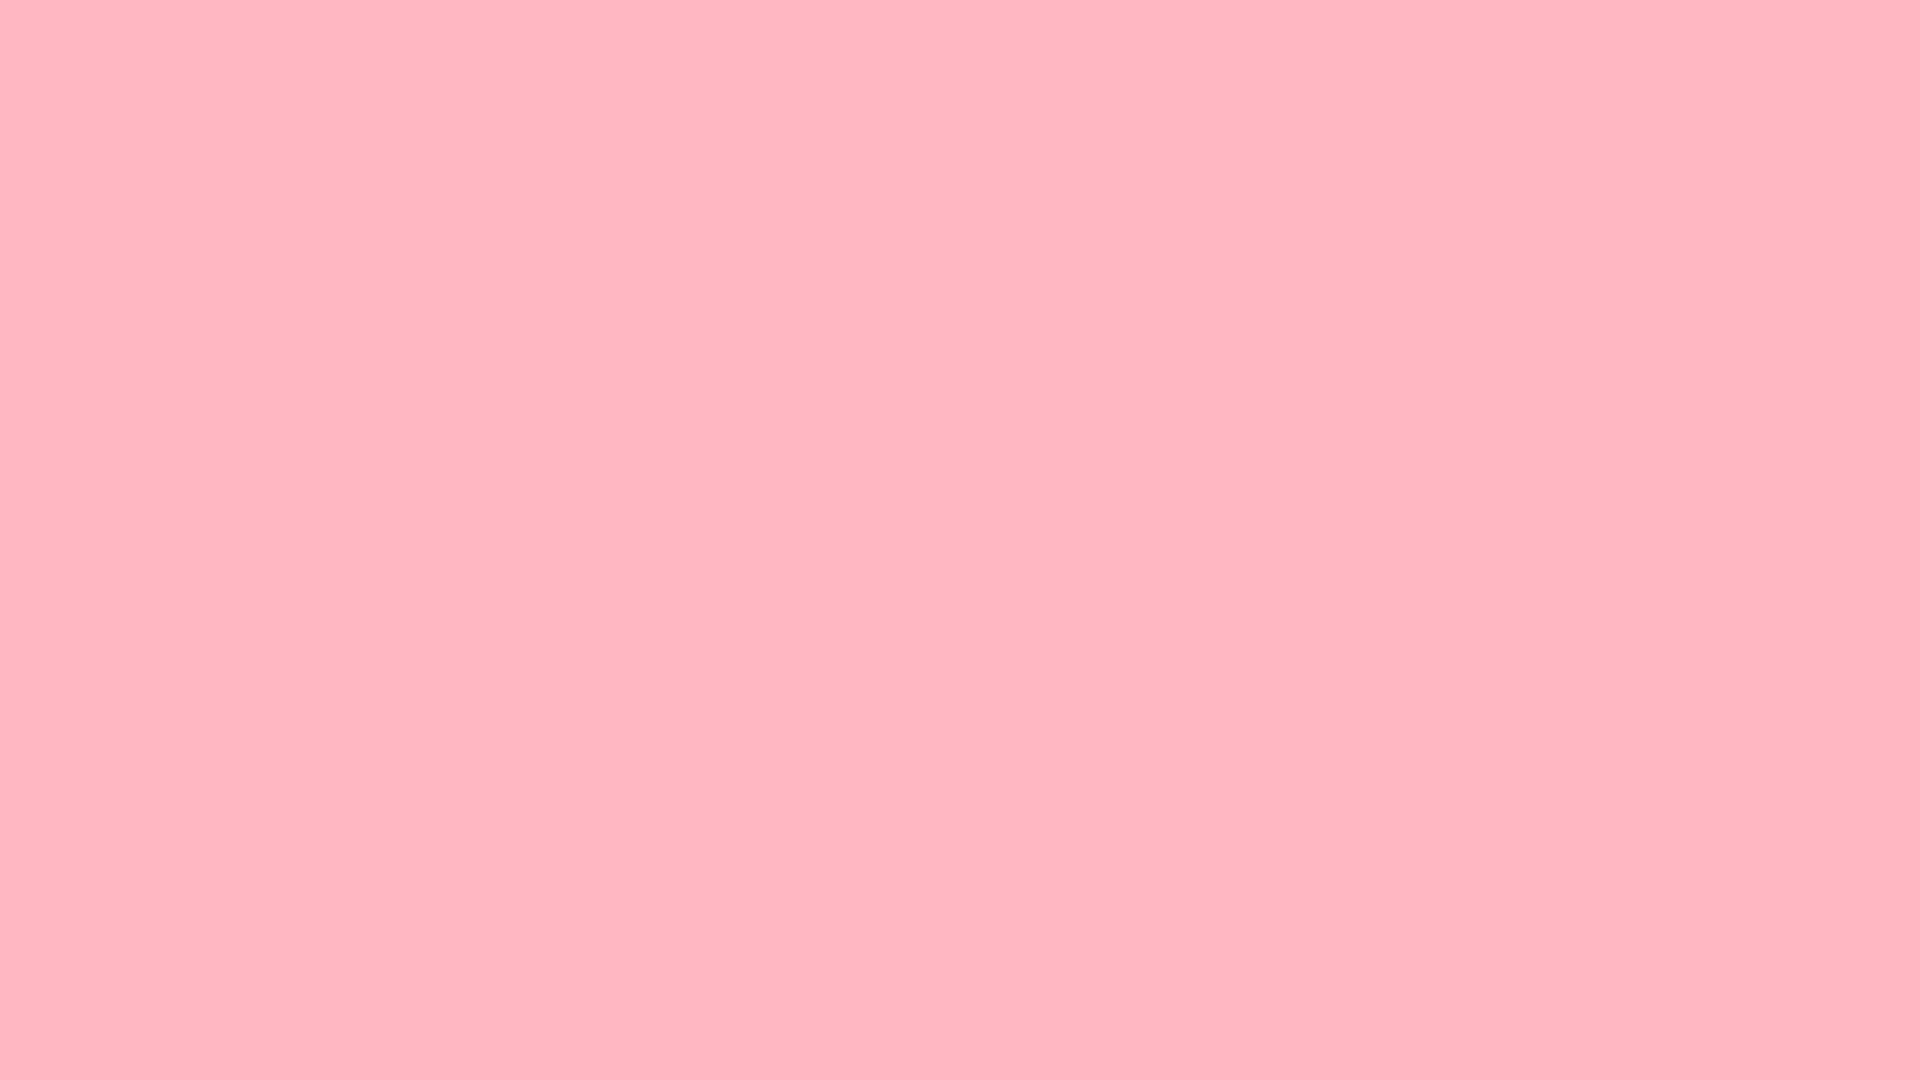 Caption: Abstract Pink Blank Template Background Background